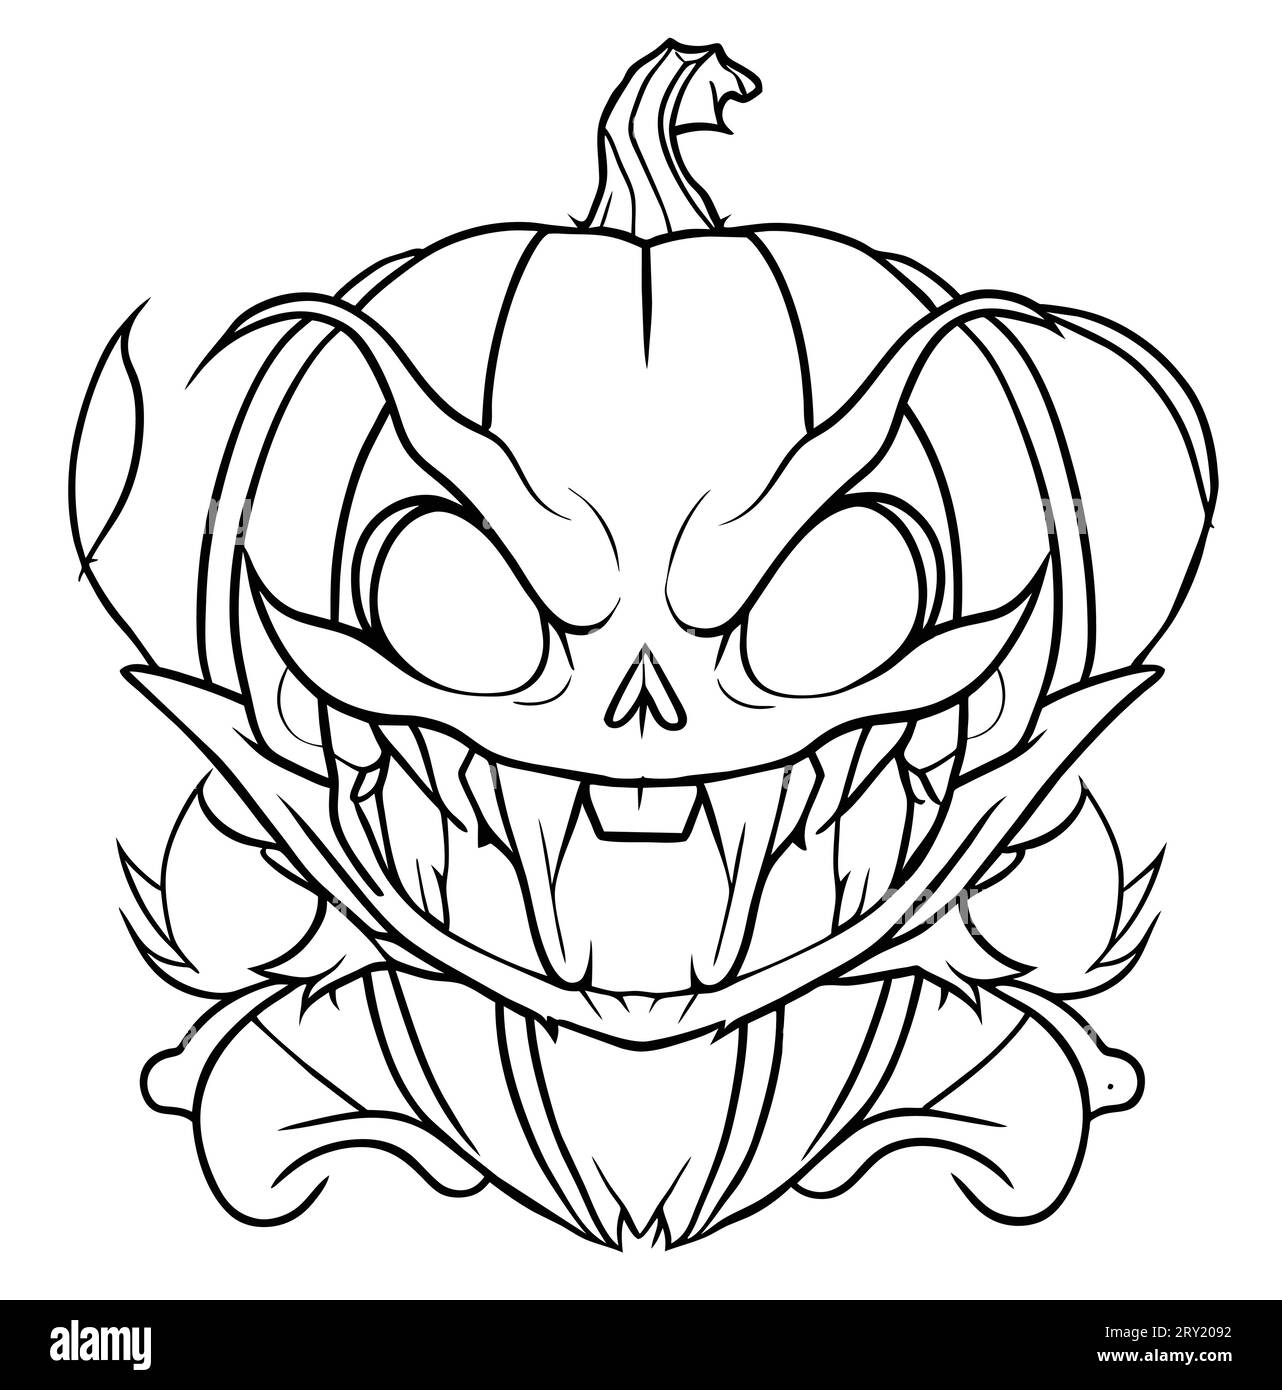 Scary pumpkin coloring sheet cut out stock images pictures